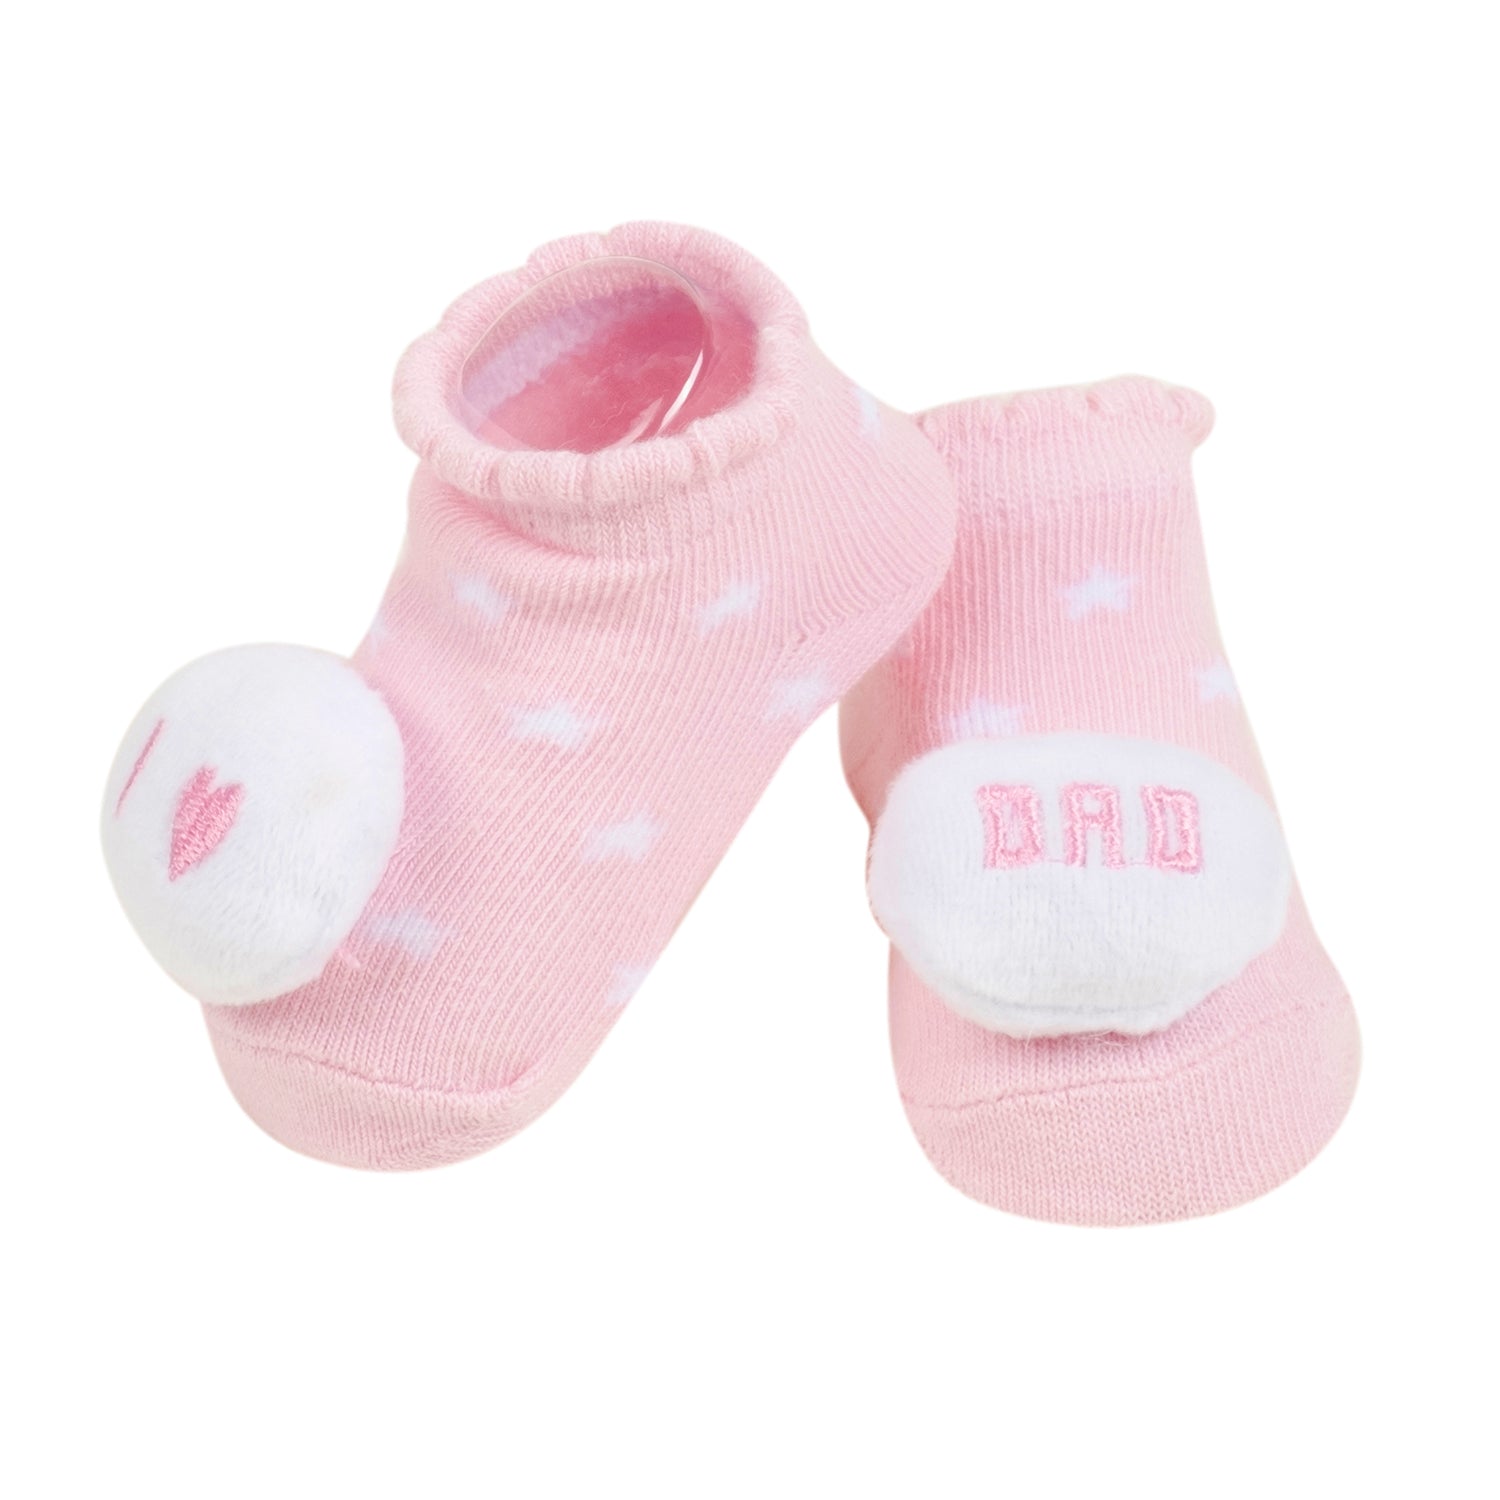 Baby Moo Mom Dad's Heart Cotton 3D Ankle Length Fancy Infant Gift Set of 2 Socks Booties - Pink, Grey